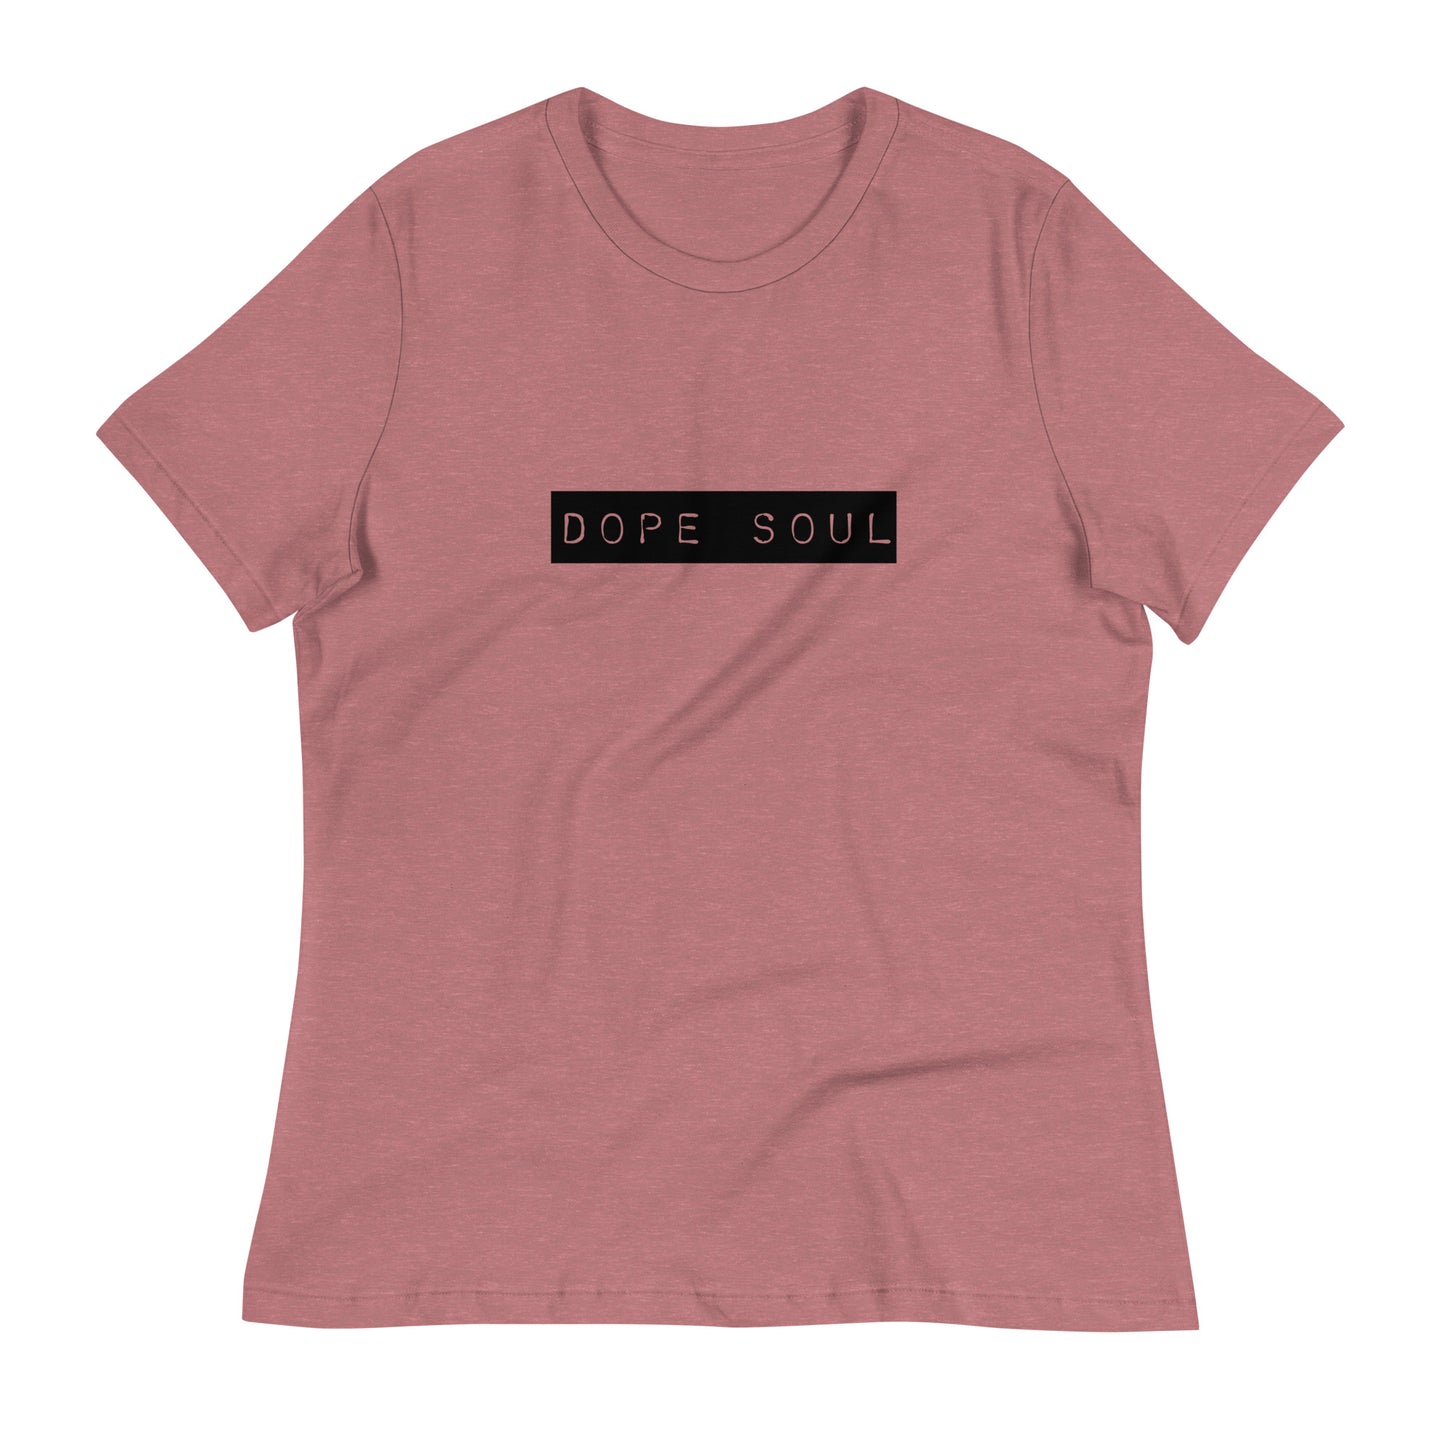 Dope Soul Women's Relaxed T-Shirt